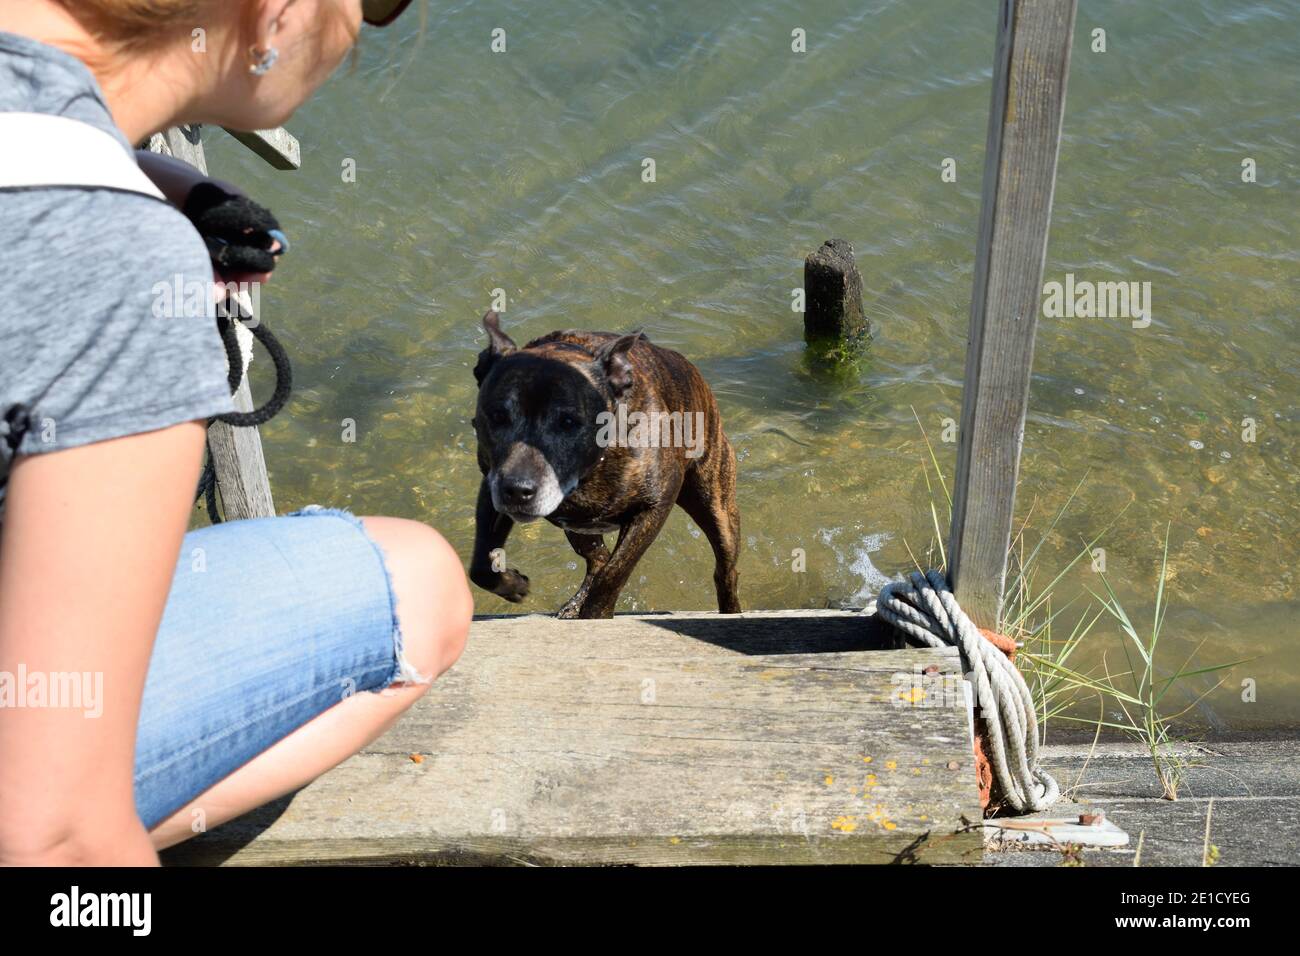 Dog Climbing Out of Water at the Seaside While Owner Waits Stock Photo